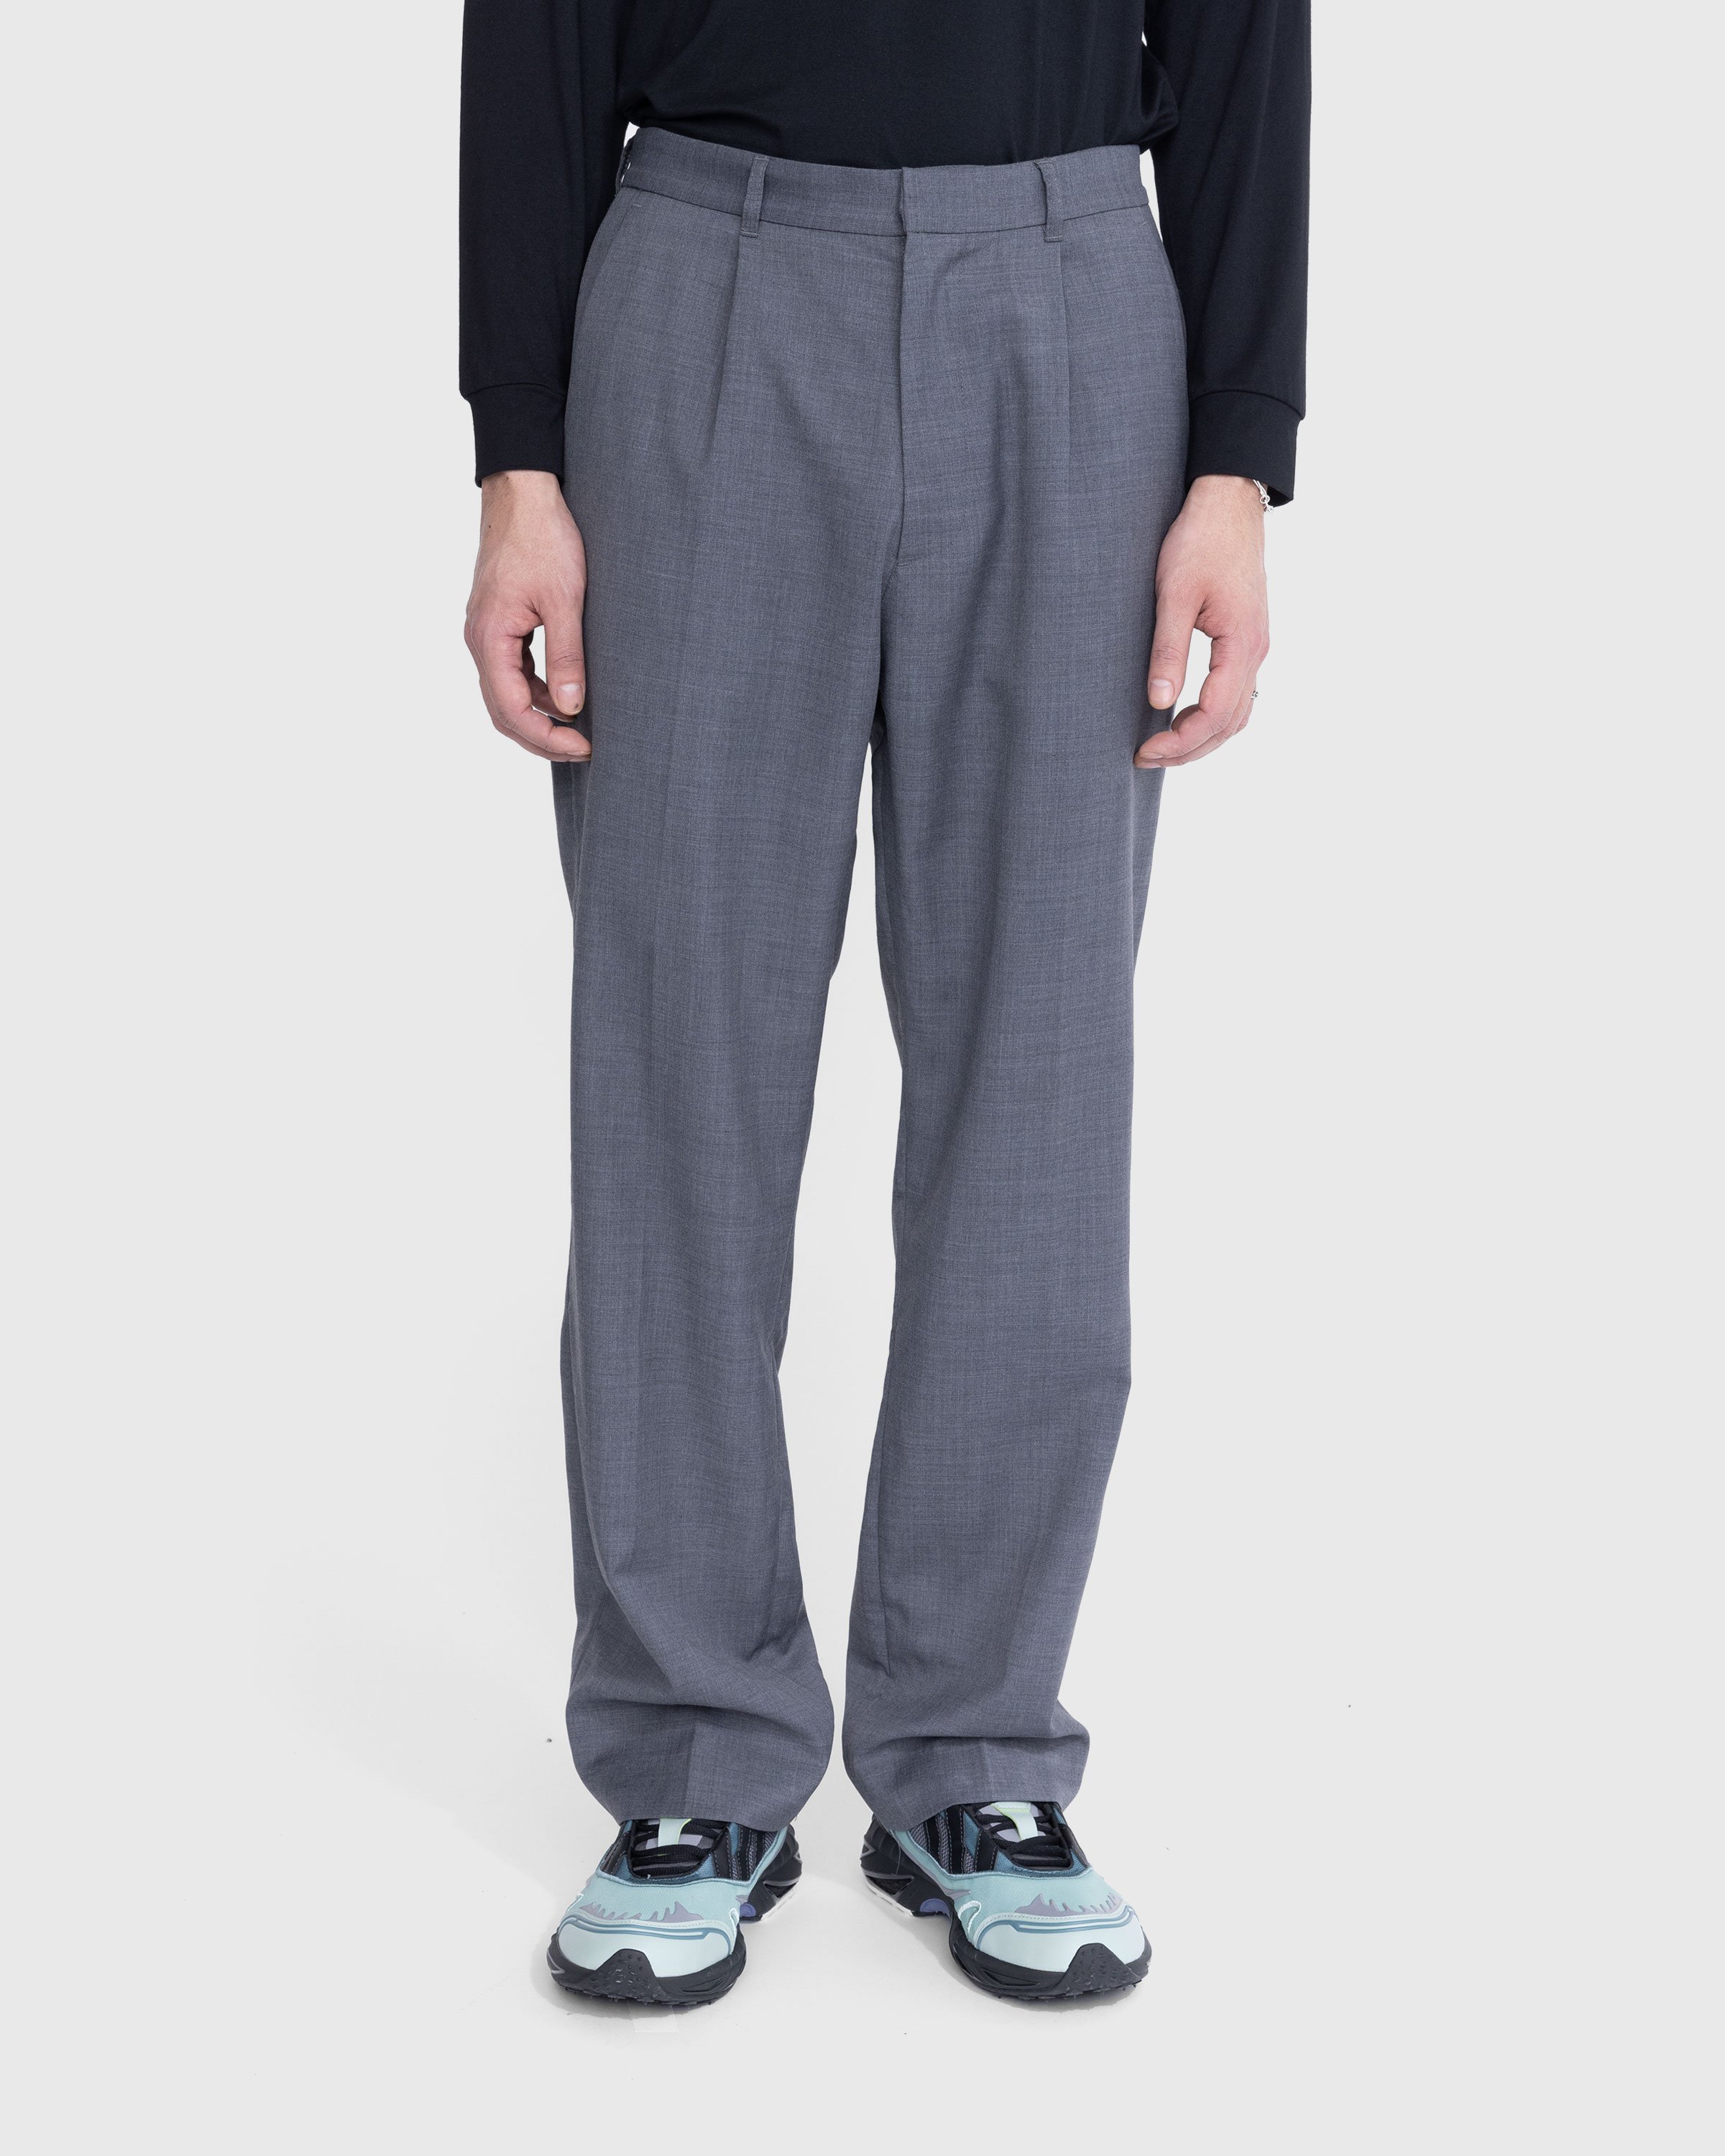 Highsnobiety - Tropical Wool Suiting Pants Grey - Clothing - Grey - Image 6